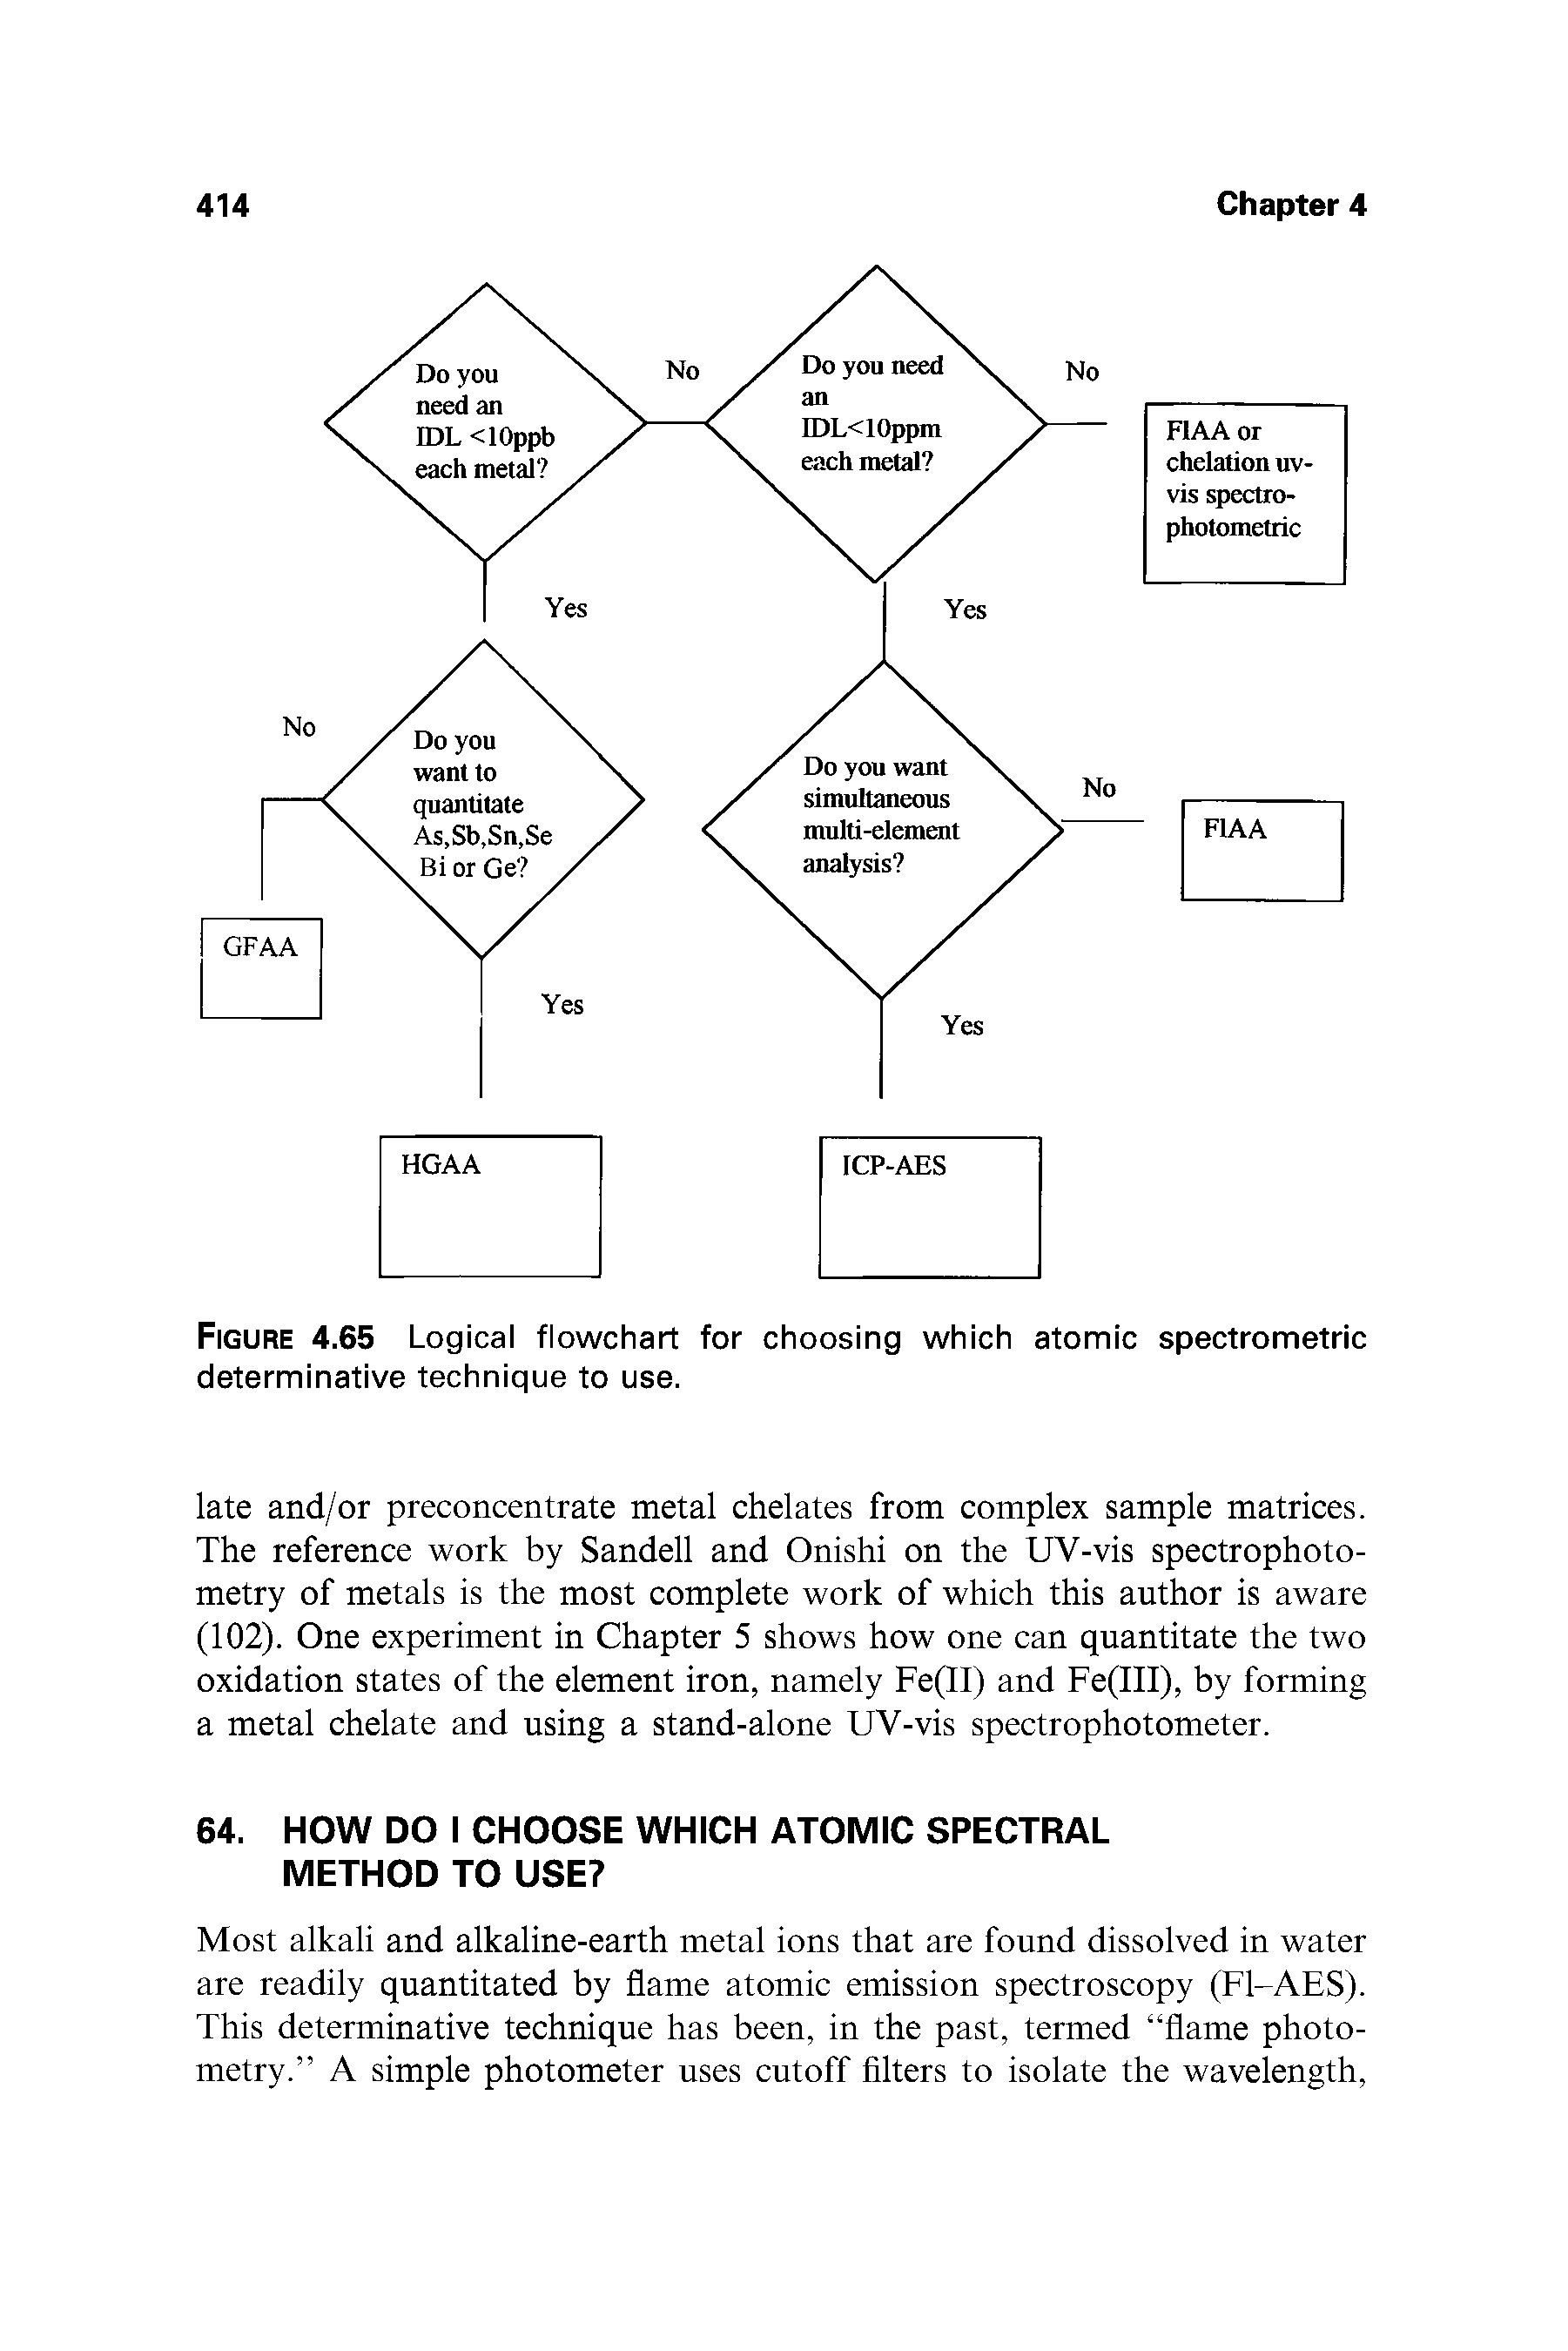 Figure 4.65 Logical flowchart for choosing which atomic spectrometric determinative technique to use.